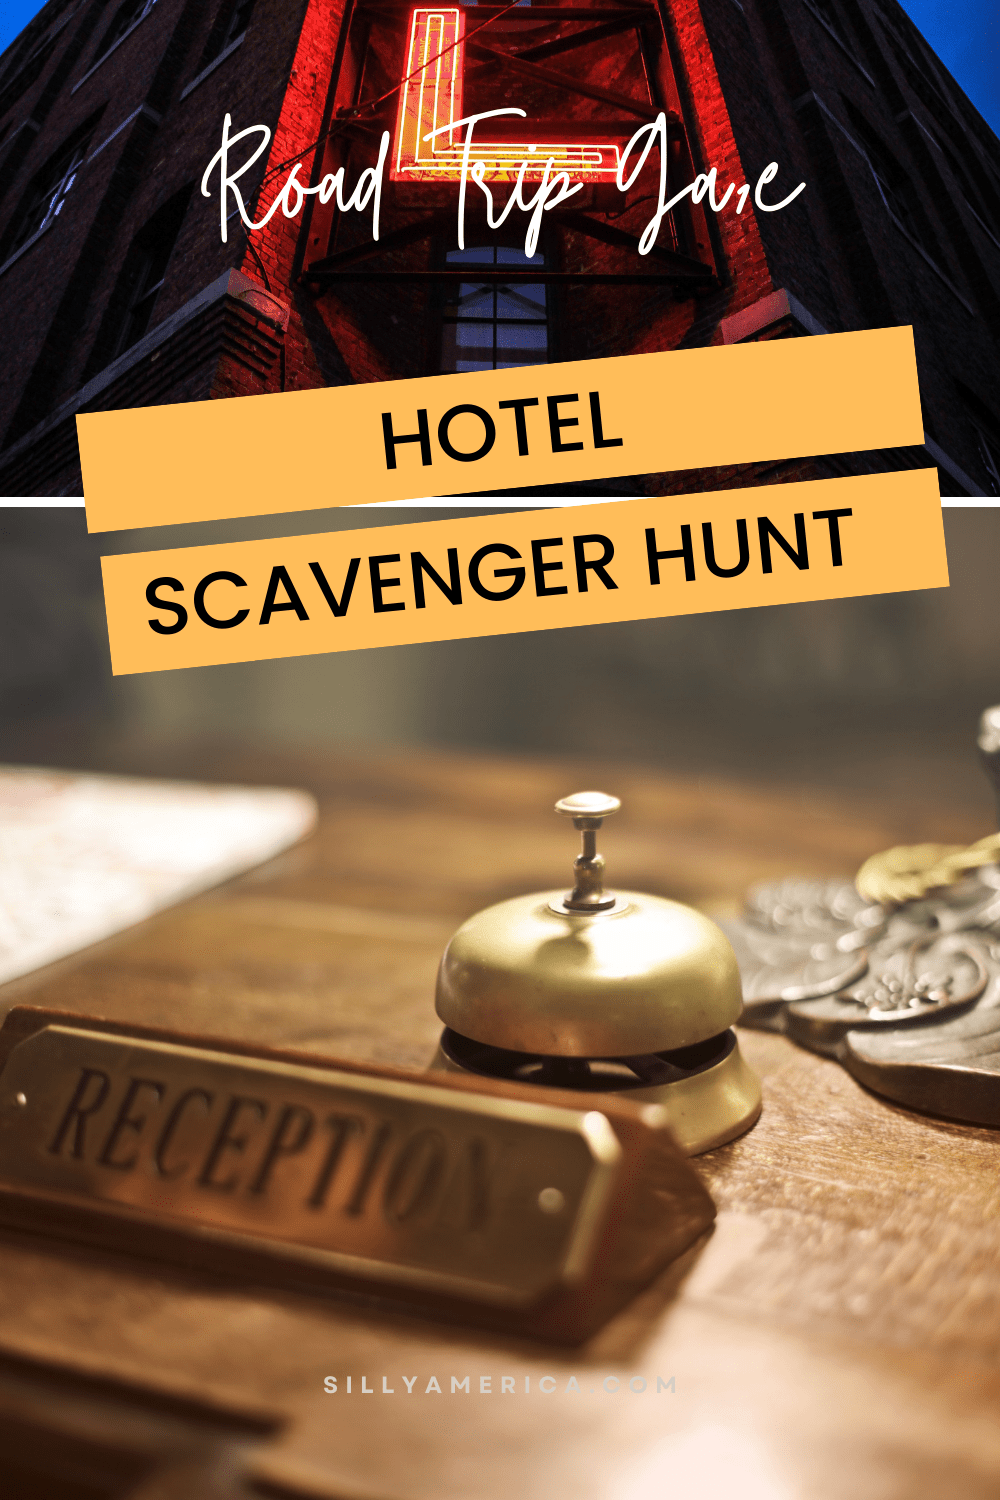 There are plenty of games to play in a hotel, and one of the most fun is a hotel scavenger hunt! Hotel scavenger hunts are a fun way to keep everyone entertained after a long day of travel. You can play different variations for young kids to adults, and even play at a hotel birthday party. Learn how to play and download some of our free hotel scavenger hunt printables! Play on a family vacation, a Disney trip, or a road trip! #Hotel #HotelGame #ScavengerHunt #HotelScavengerHunt